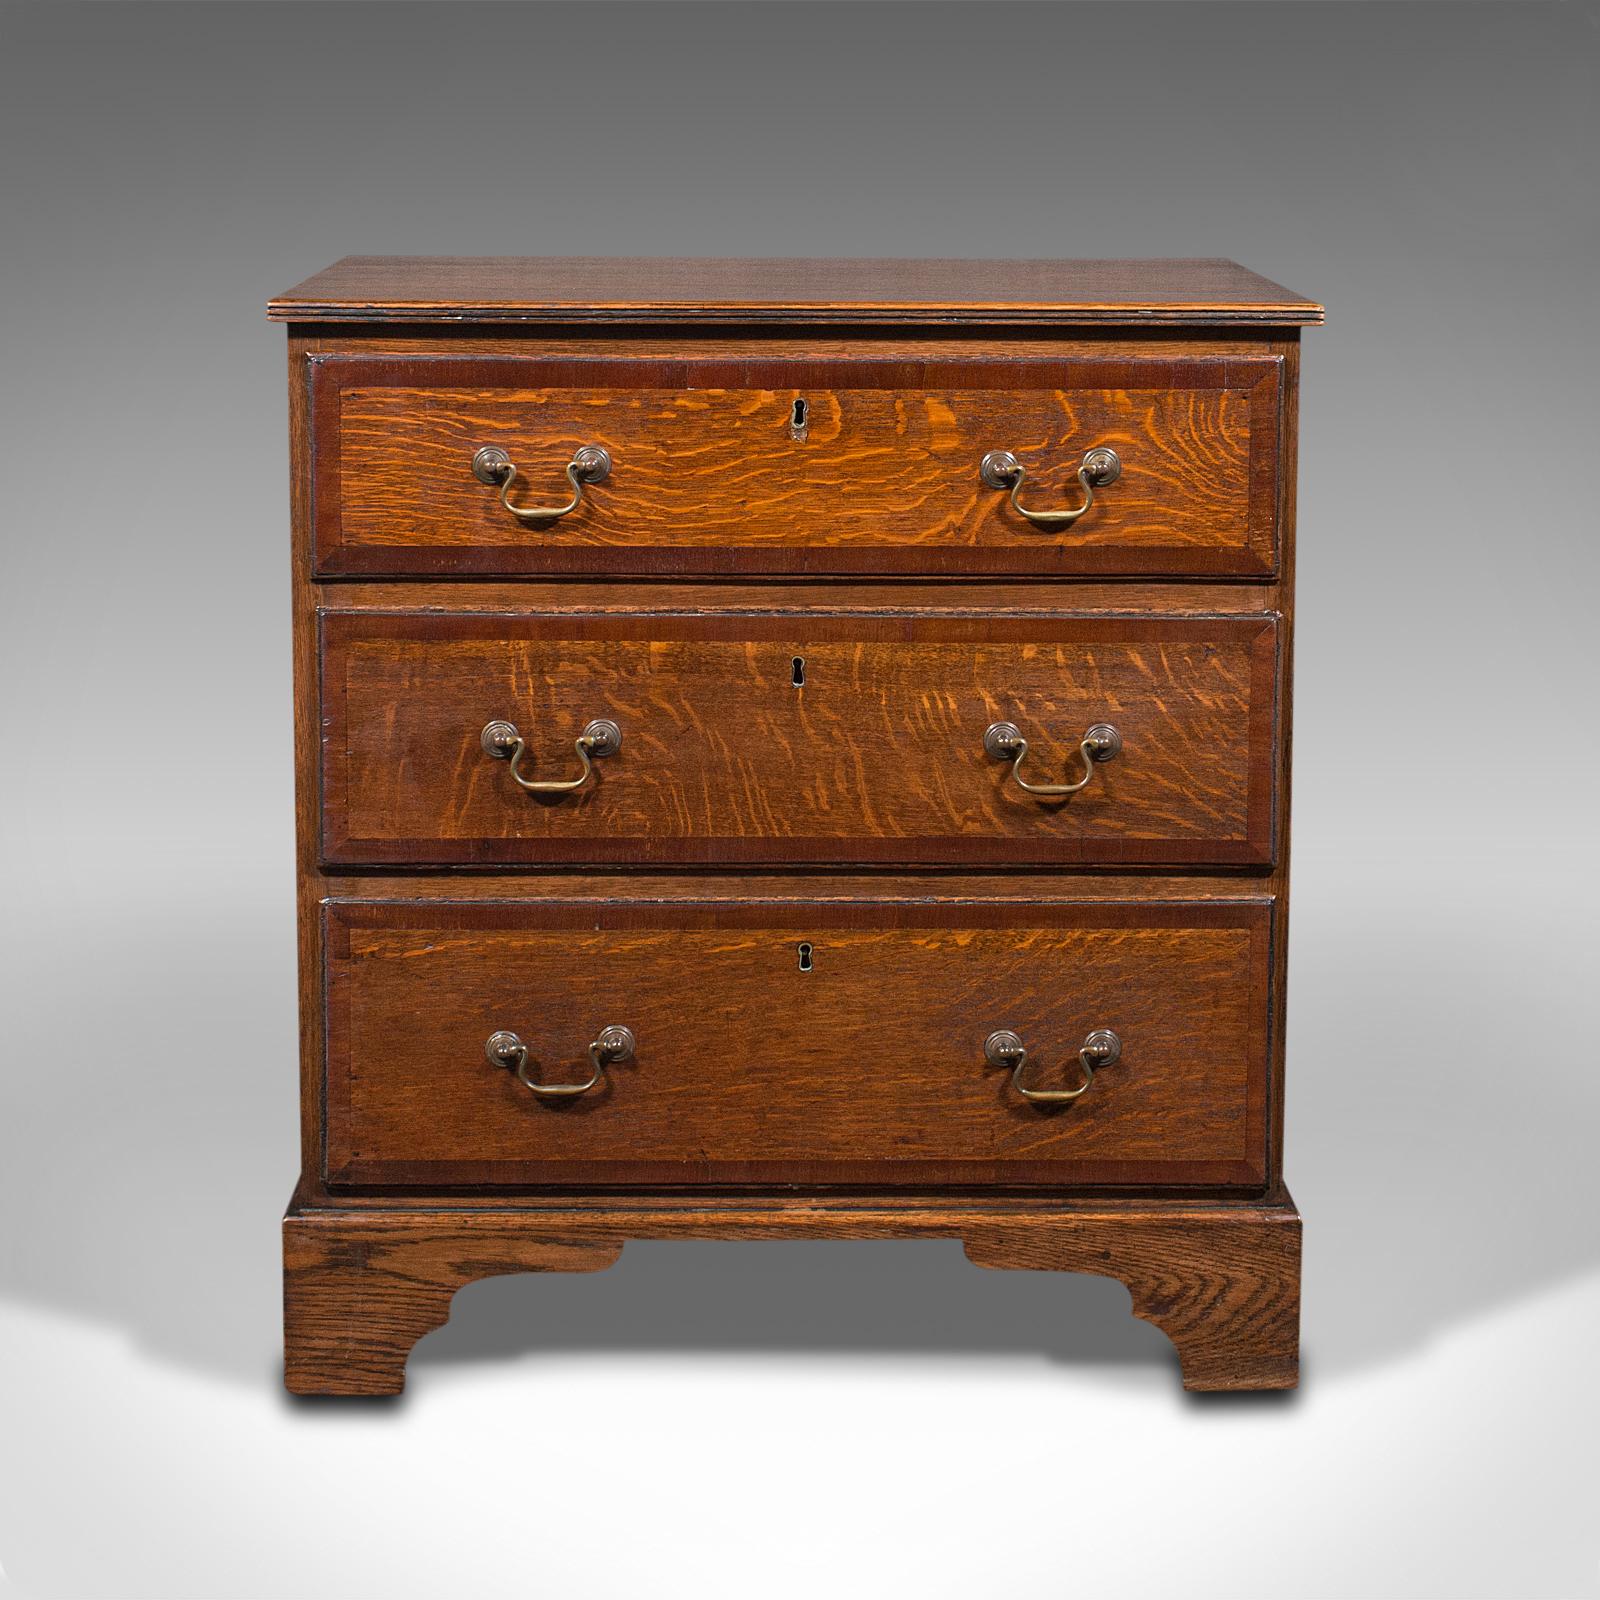 This is an antique compact chest of drawers. An English, oak bedside cabinet, dating to the Georgian period, circa 1800.

Striking antique chest of drawers with eye-catching figuring
Displays a desirable aged patina and in good order
Select oak